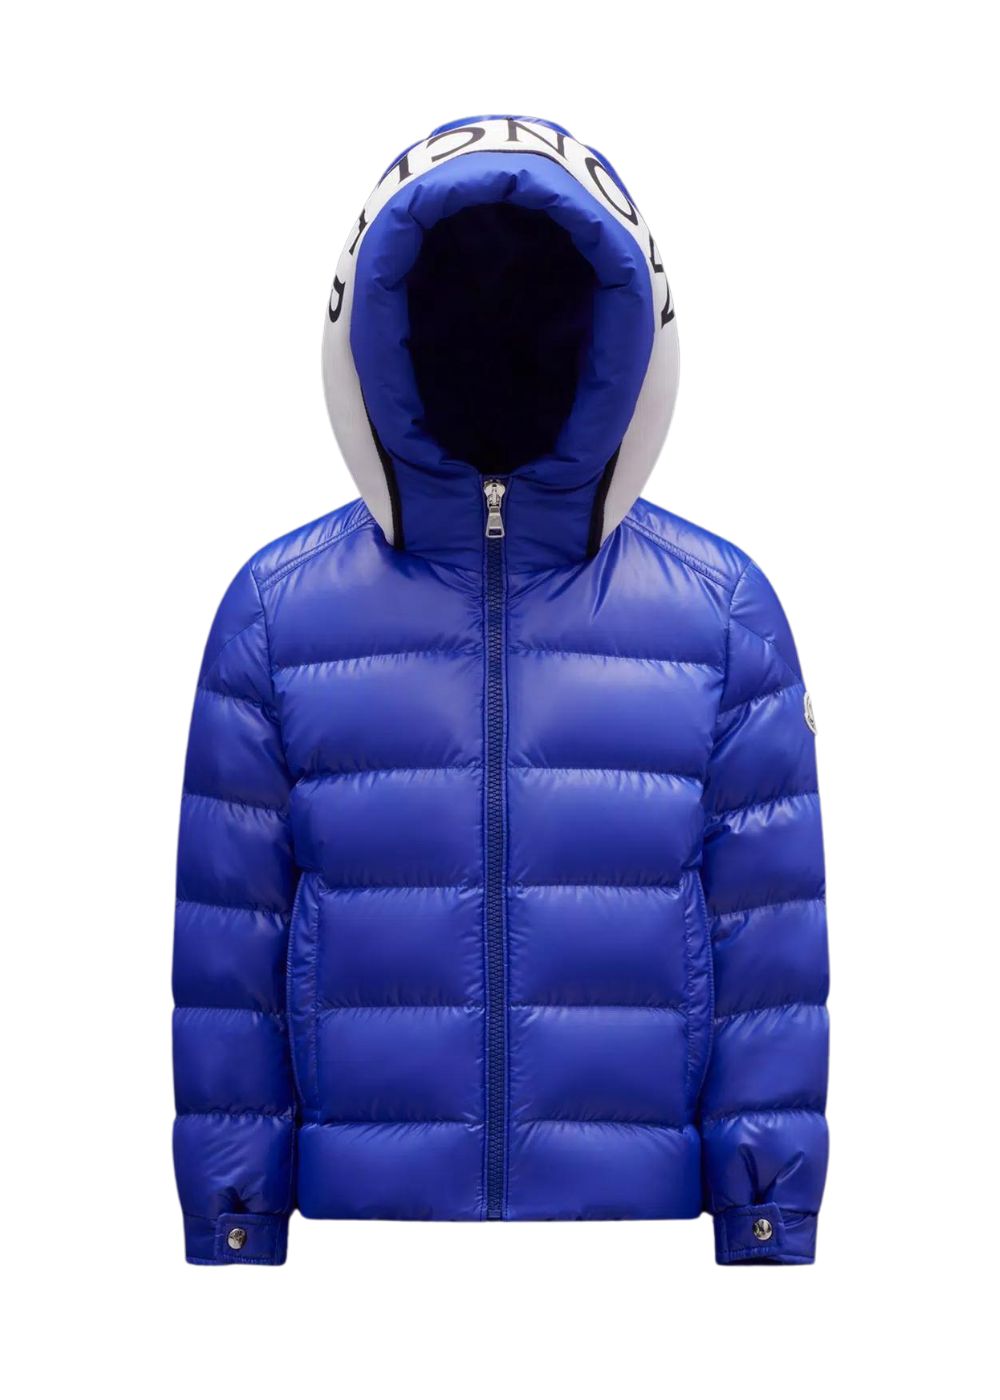 Featured image for “Moncler Piumino Cardere”